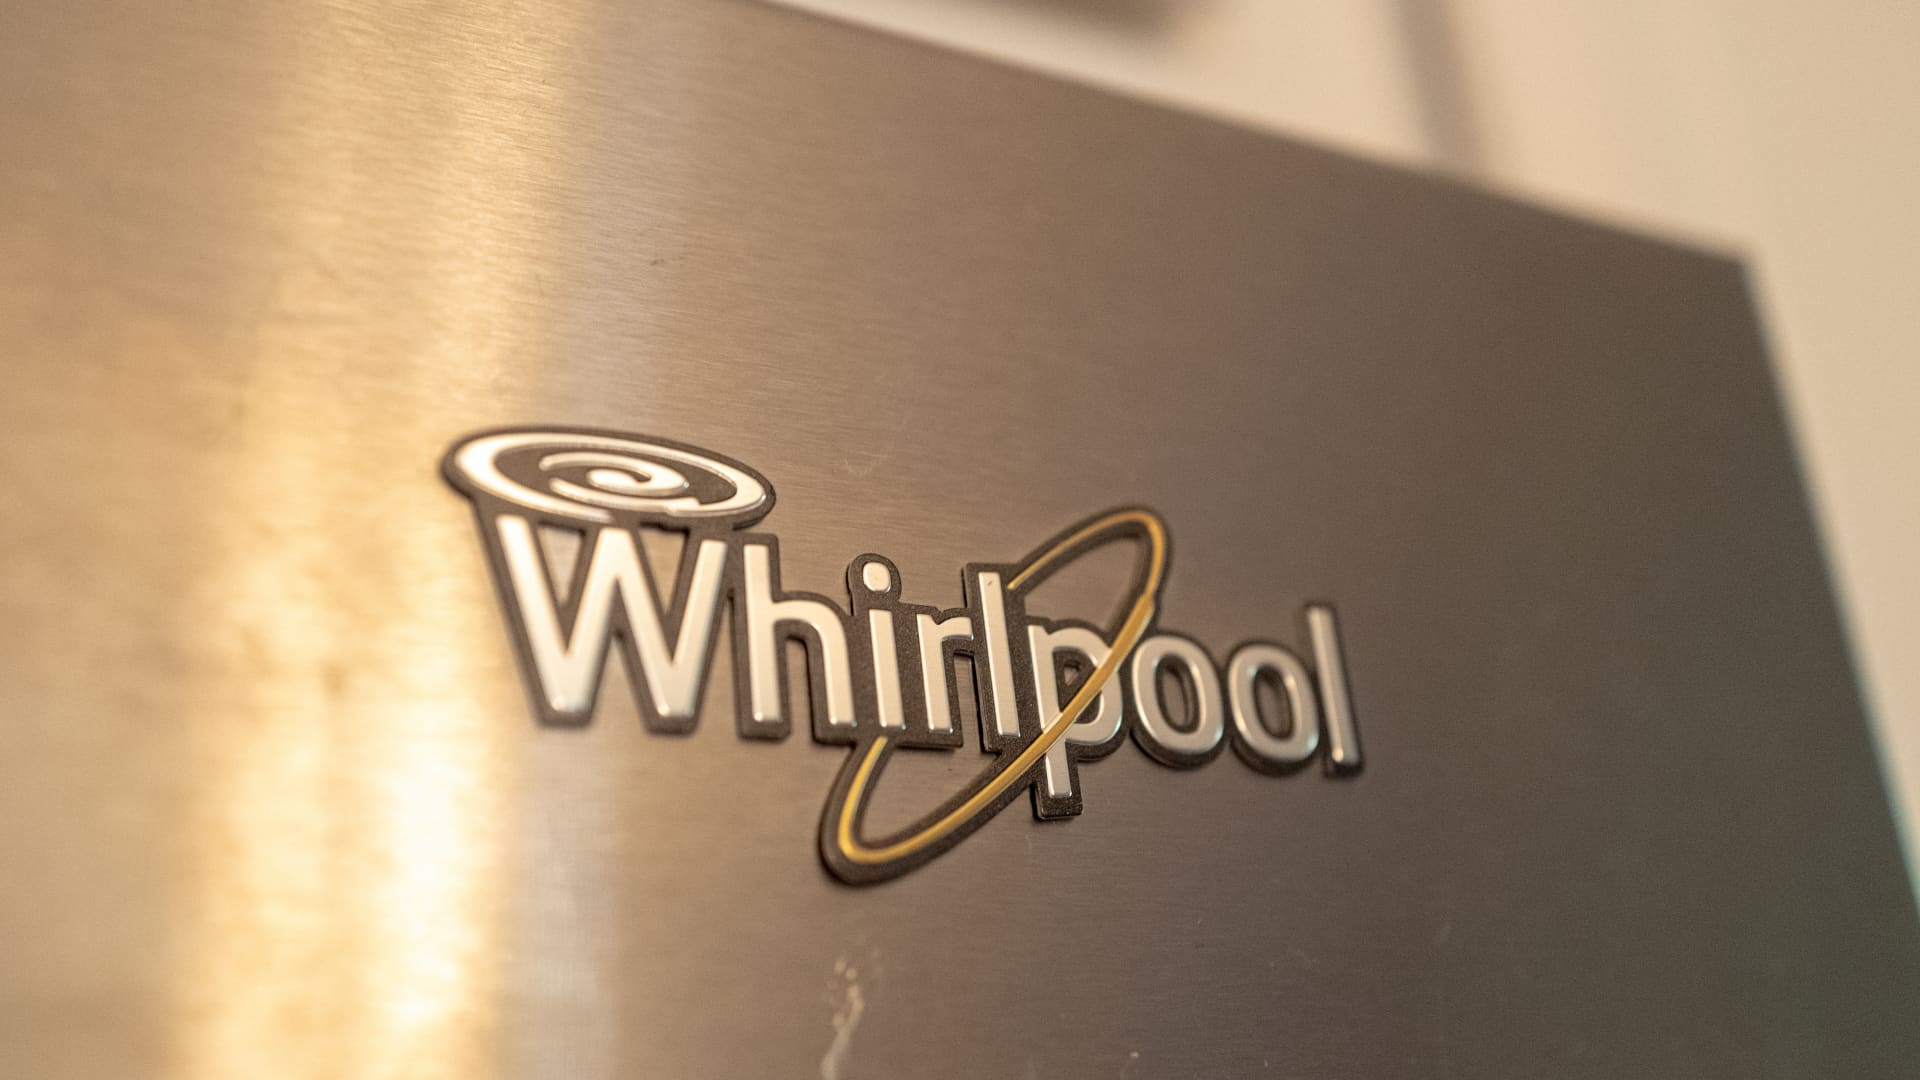 Whirlpool’s CEO says the company is tackling inflationary challenges